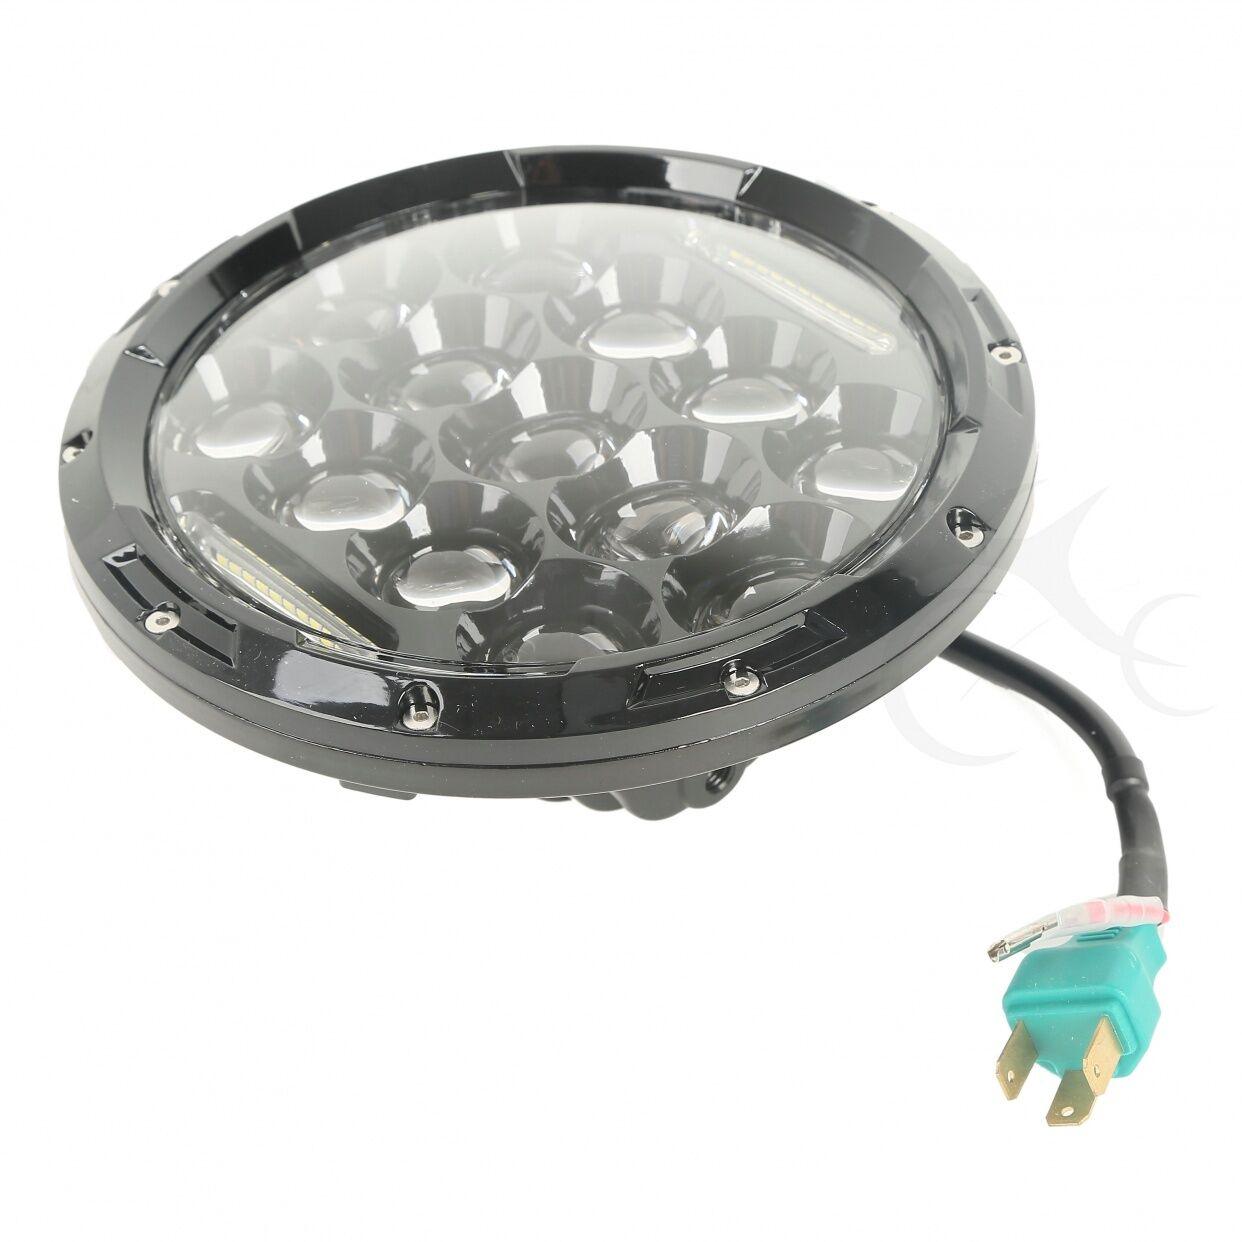 7" Projector High Low LED Bulb Headlight Fit For Harley Touring 94-13 Softail - Moto Life Products